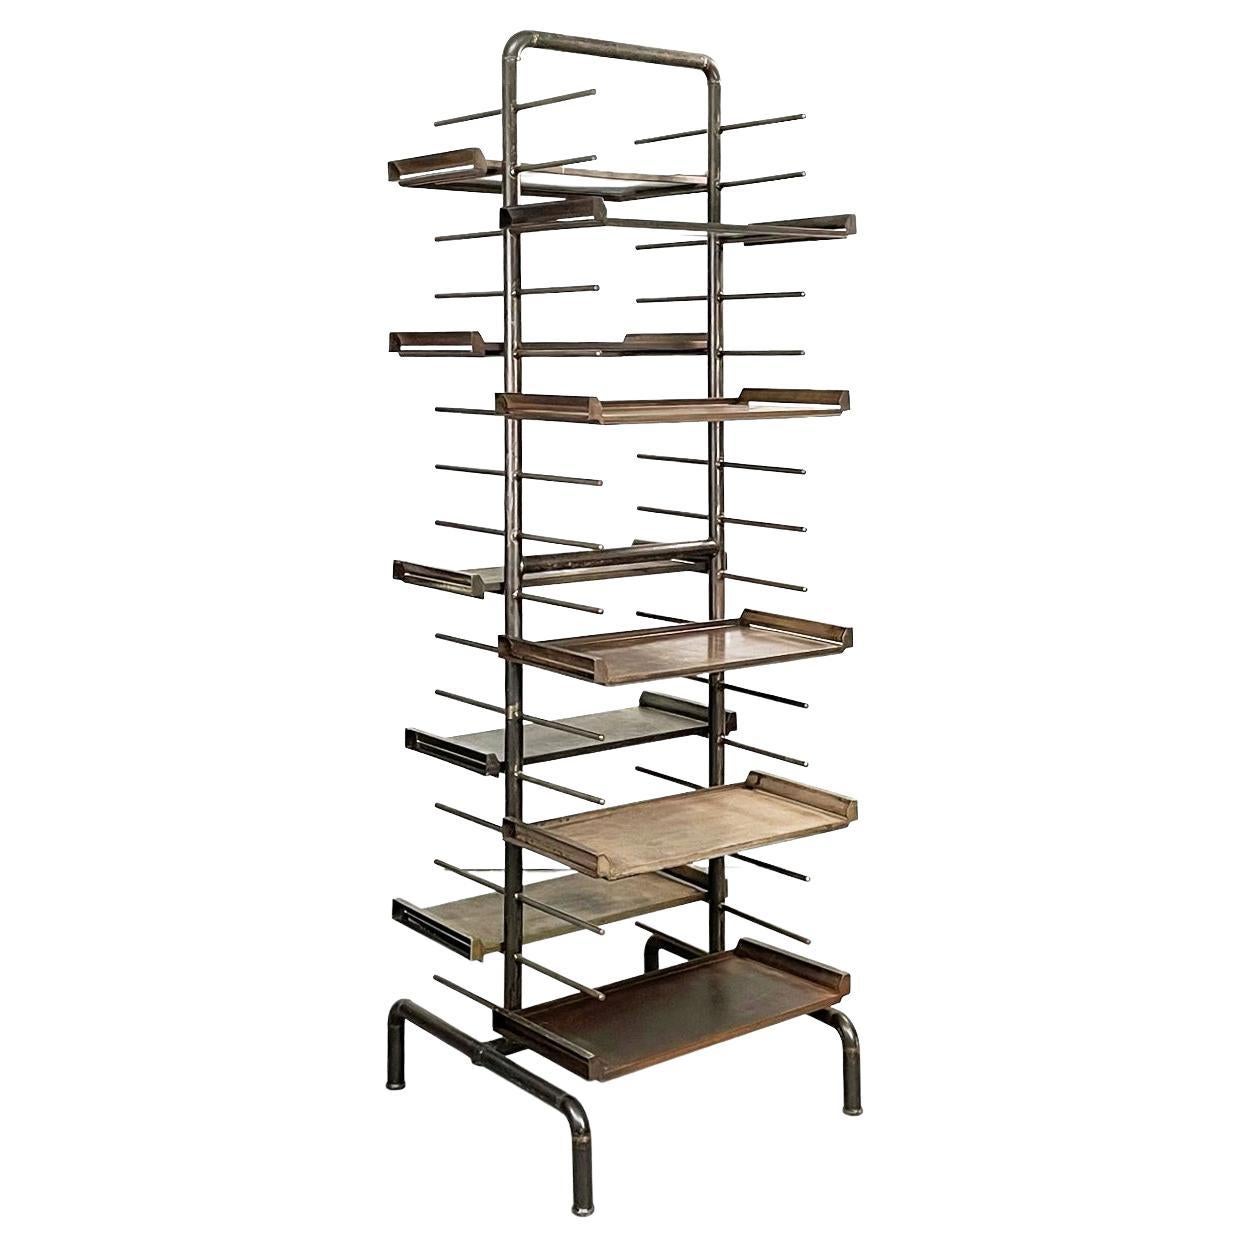 Italian Post-Modern Bookcase with Tubular Metal and Moving Shelves, 1990-2000s